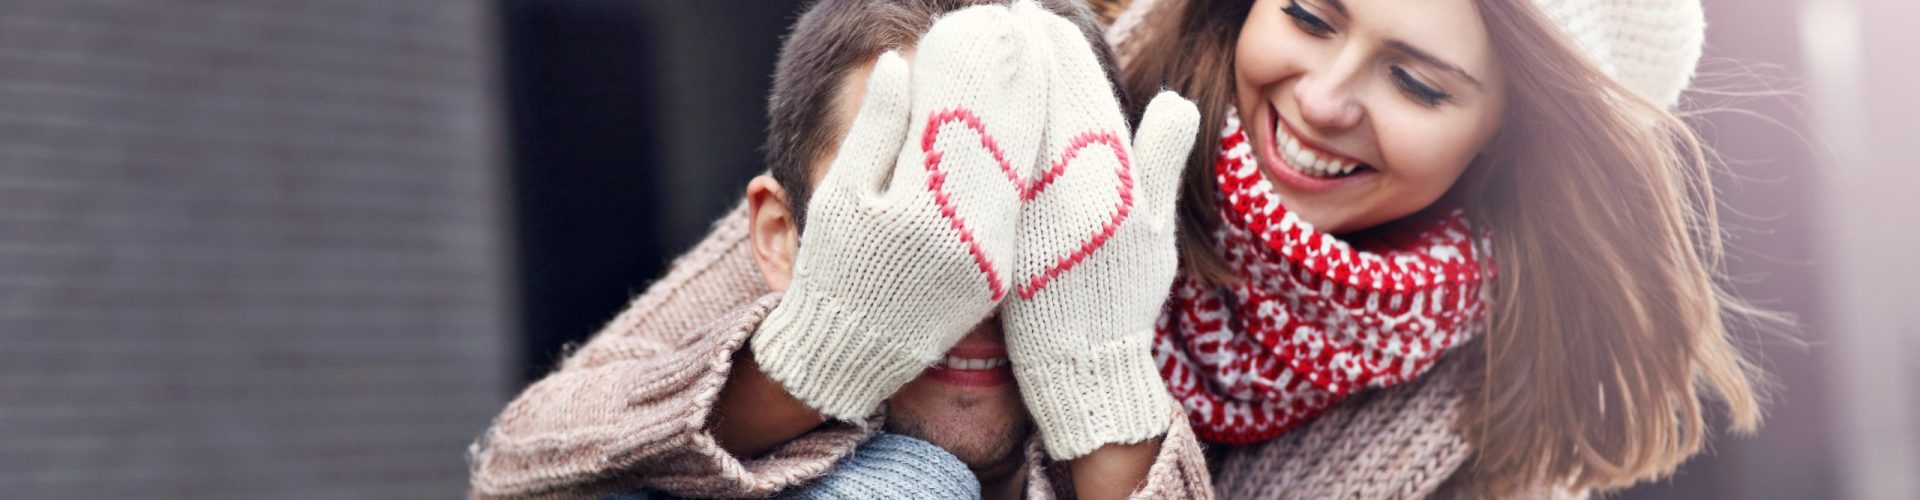 Woman covering her partner's eyes wearing mittens with a heart